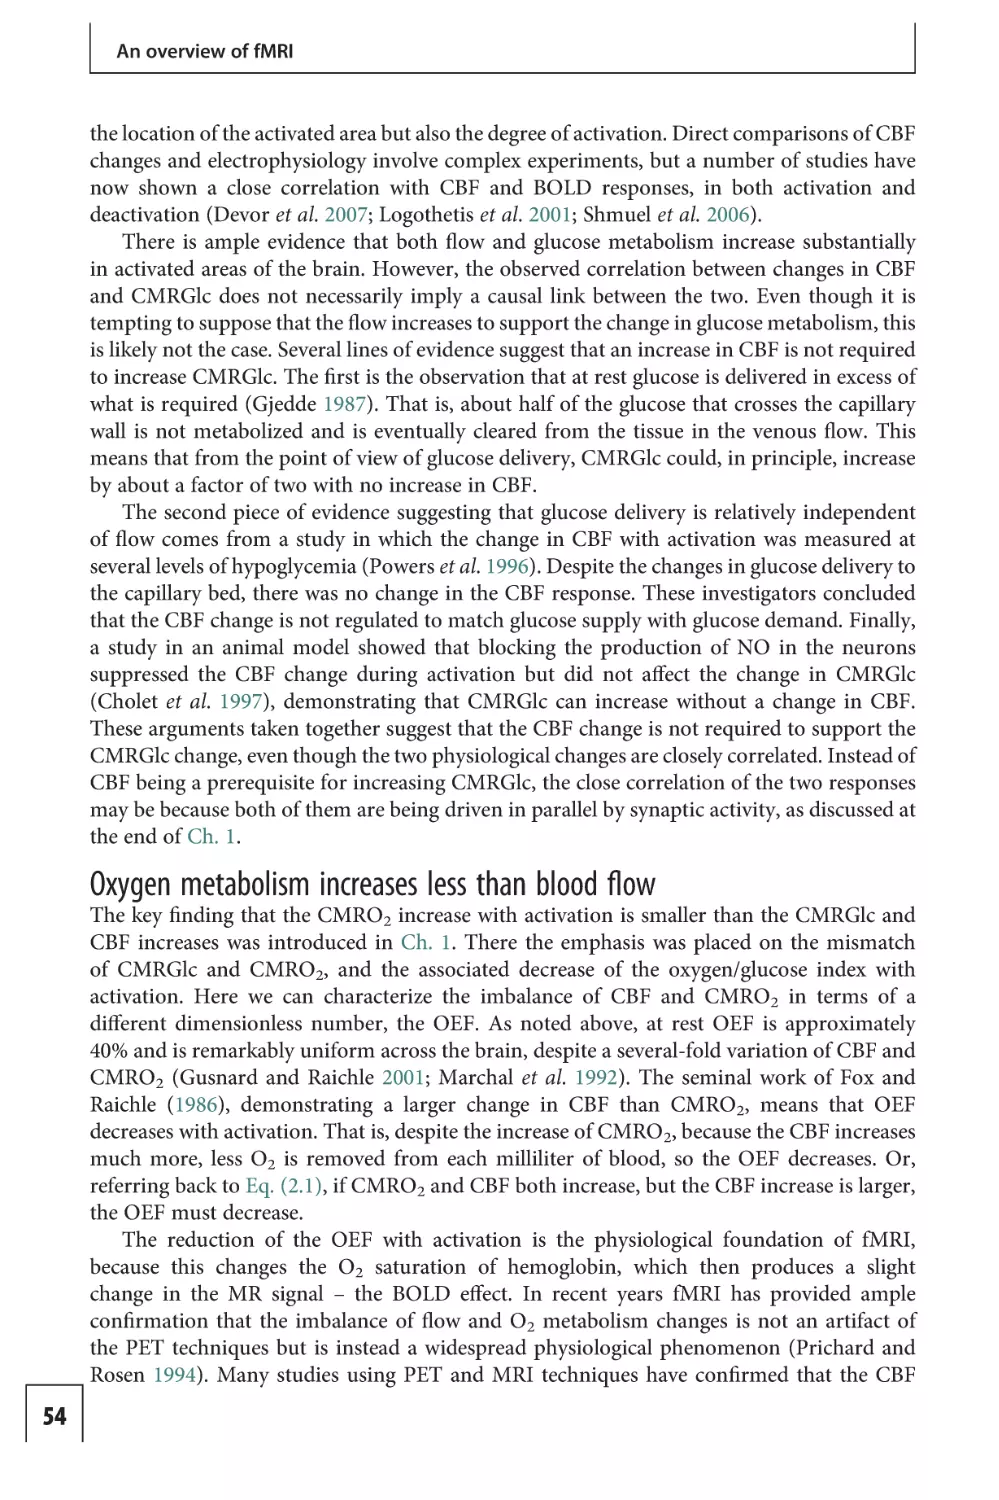 Oxygen metabolism increases less than blood flow